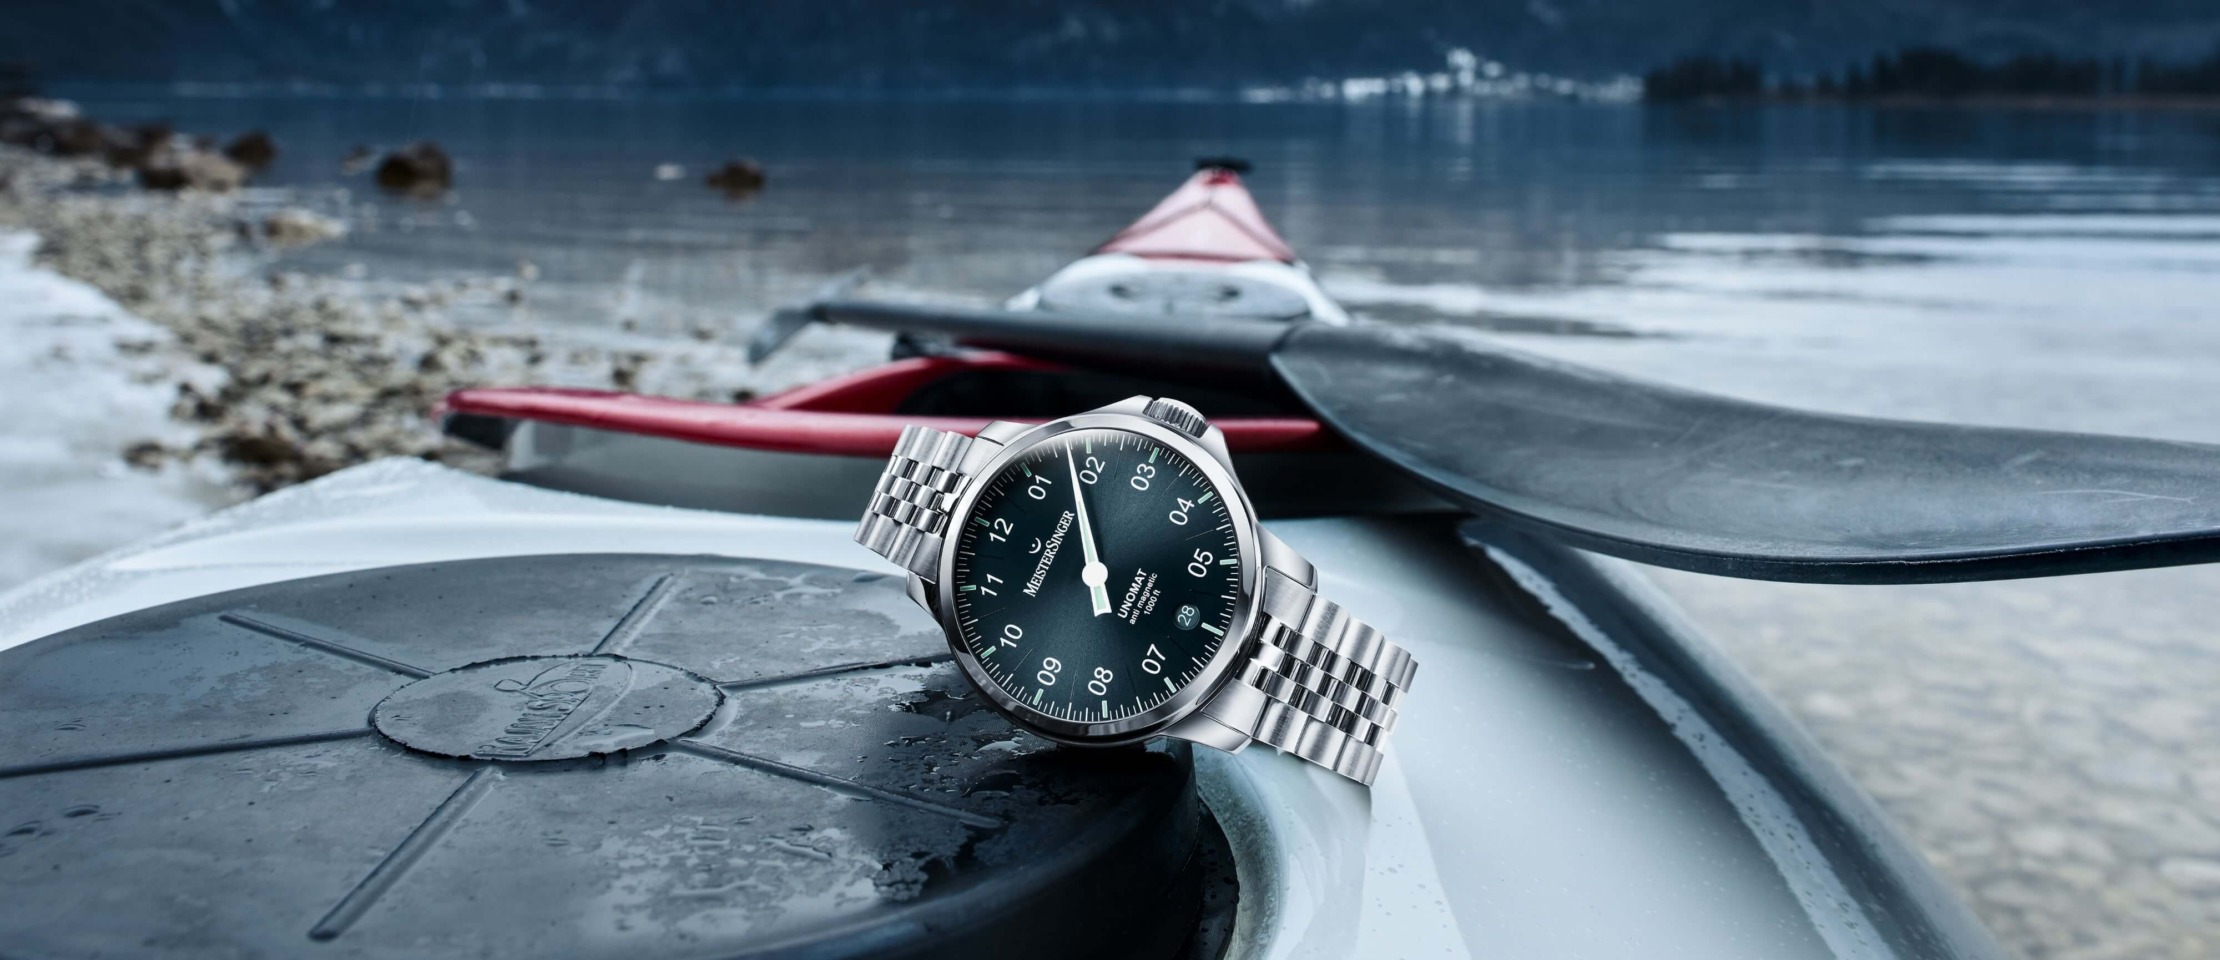 MeisterSinger’s new Unomat is not only crazy water-resistant, but also anti-magnetic